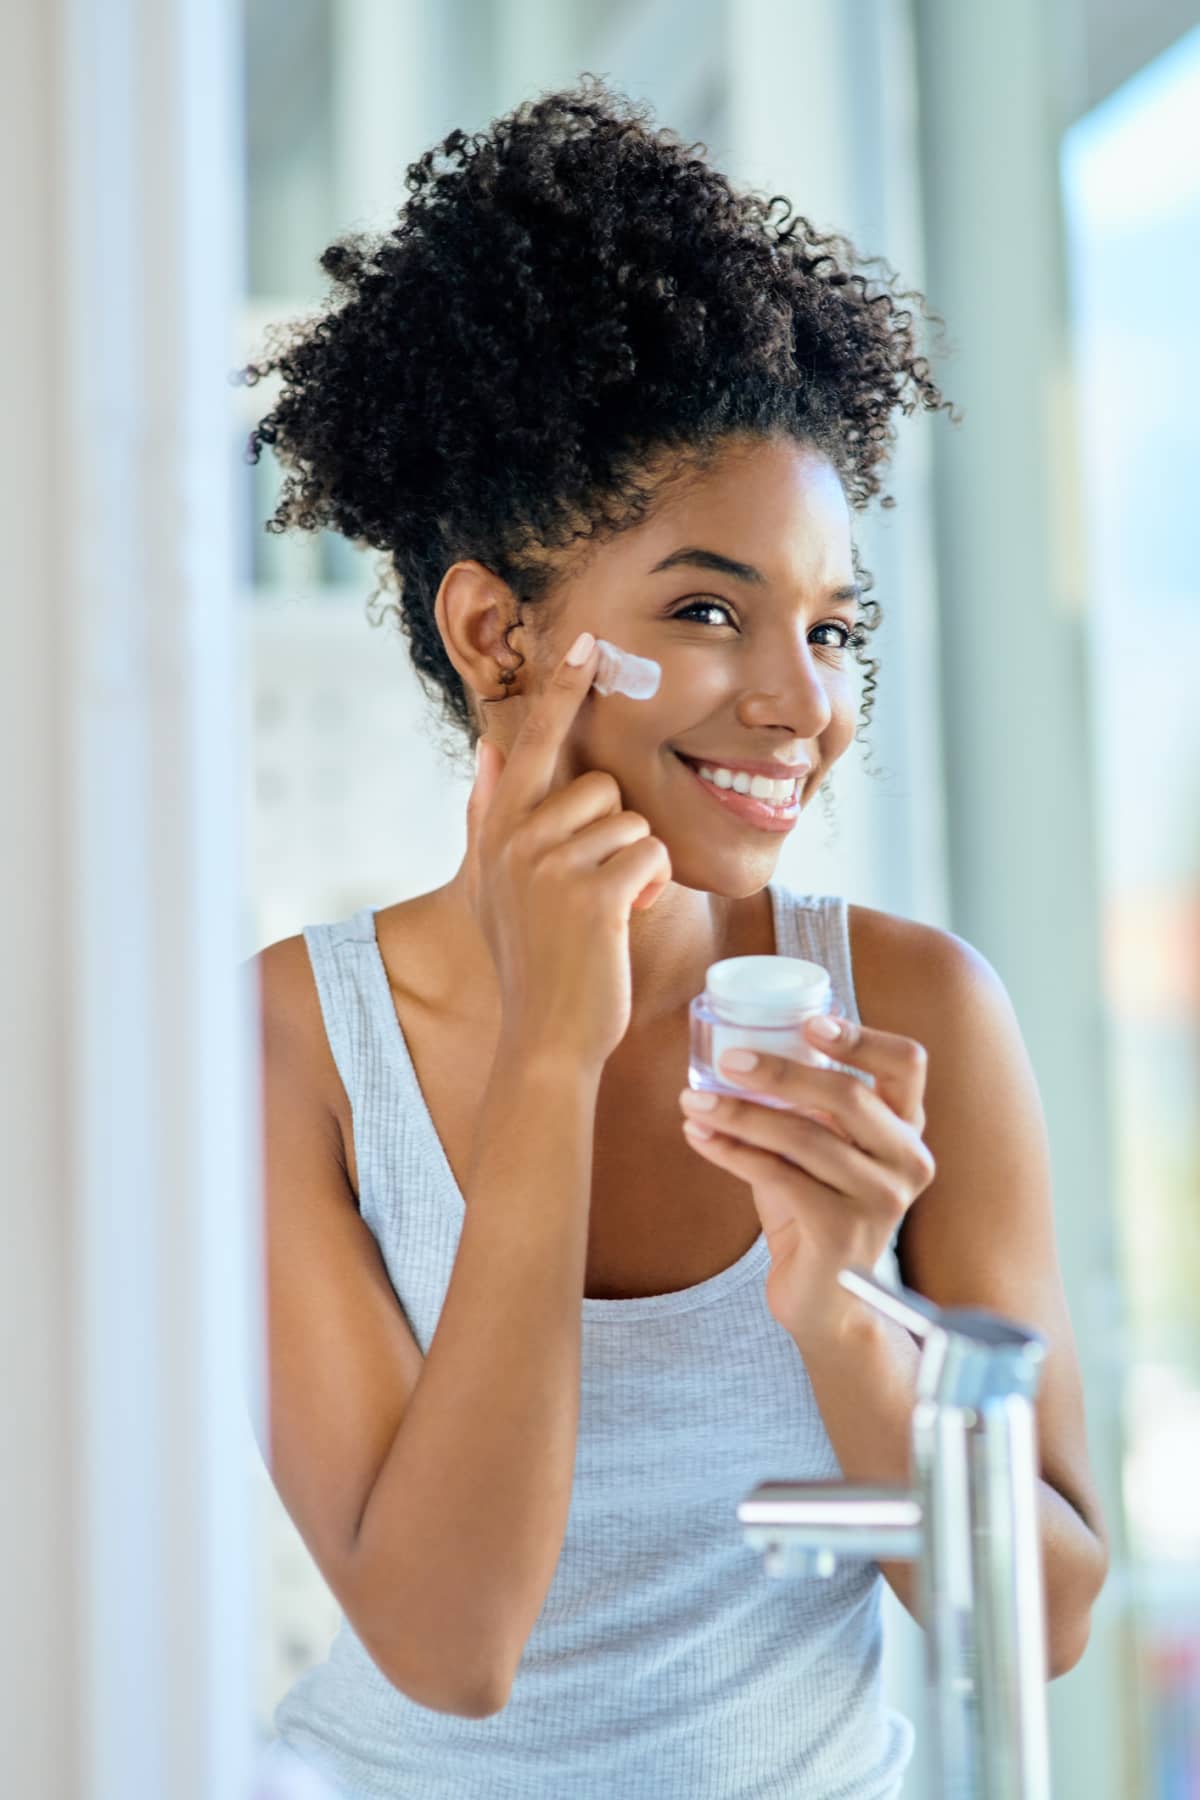  woman applying moisturizer to her face during her morning beauty routine.